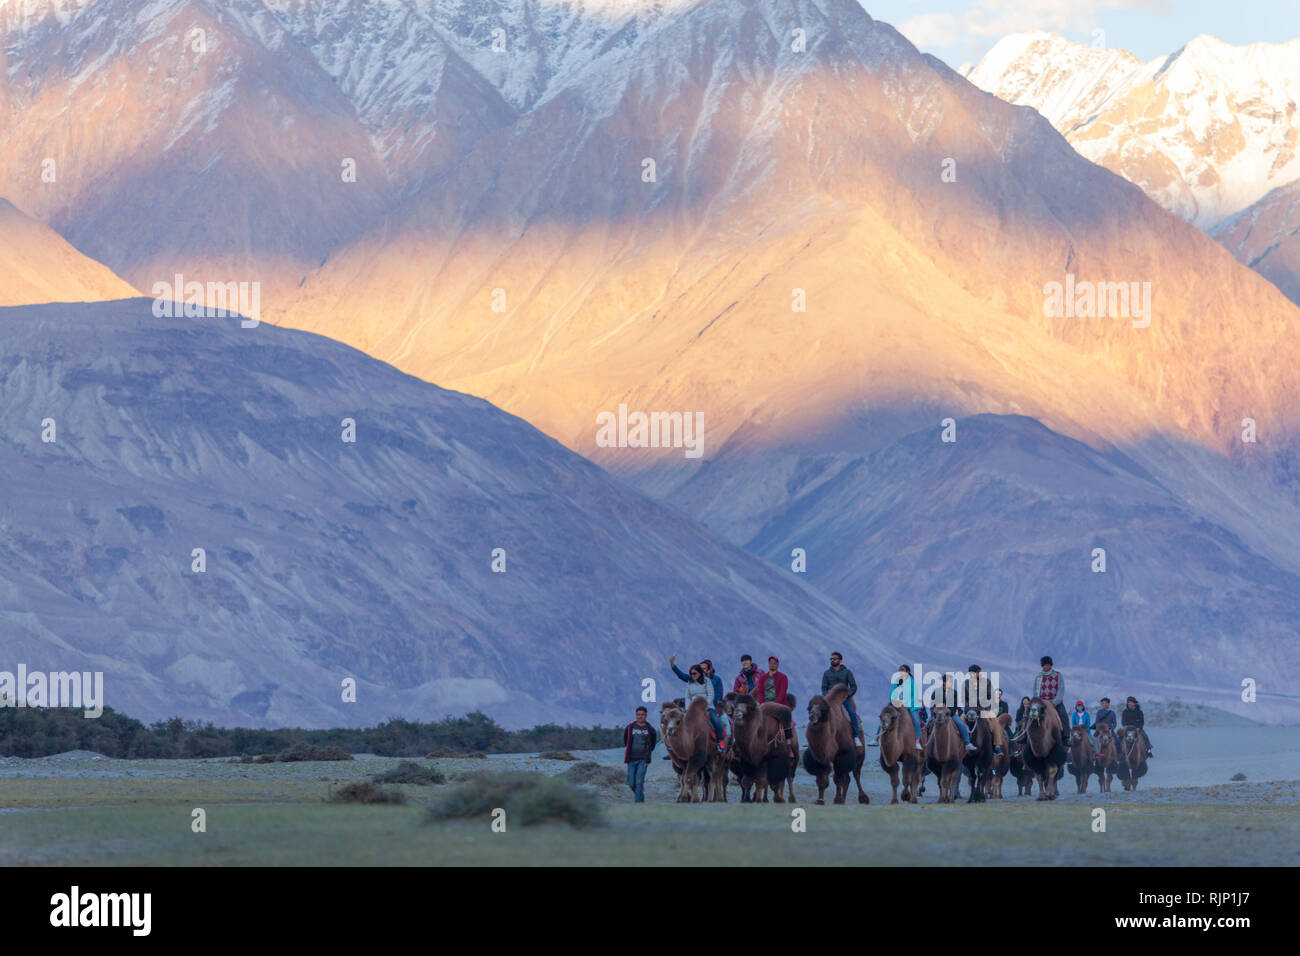 Tourists riding bactrian camels in the beautiful sunset scenery in the area near Hunder, Nubra Valley, Ladakh, Jammu and Kashmir, India Stock Photo